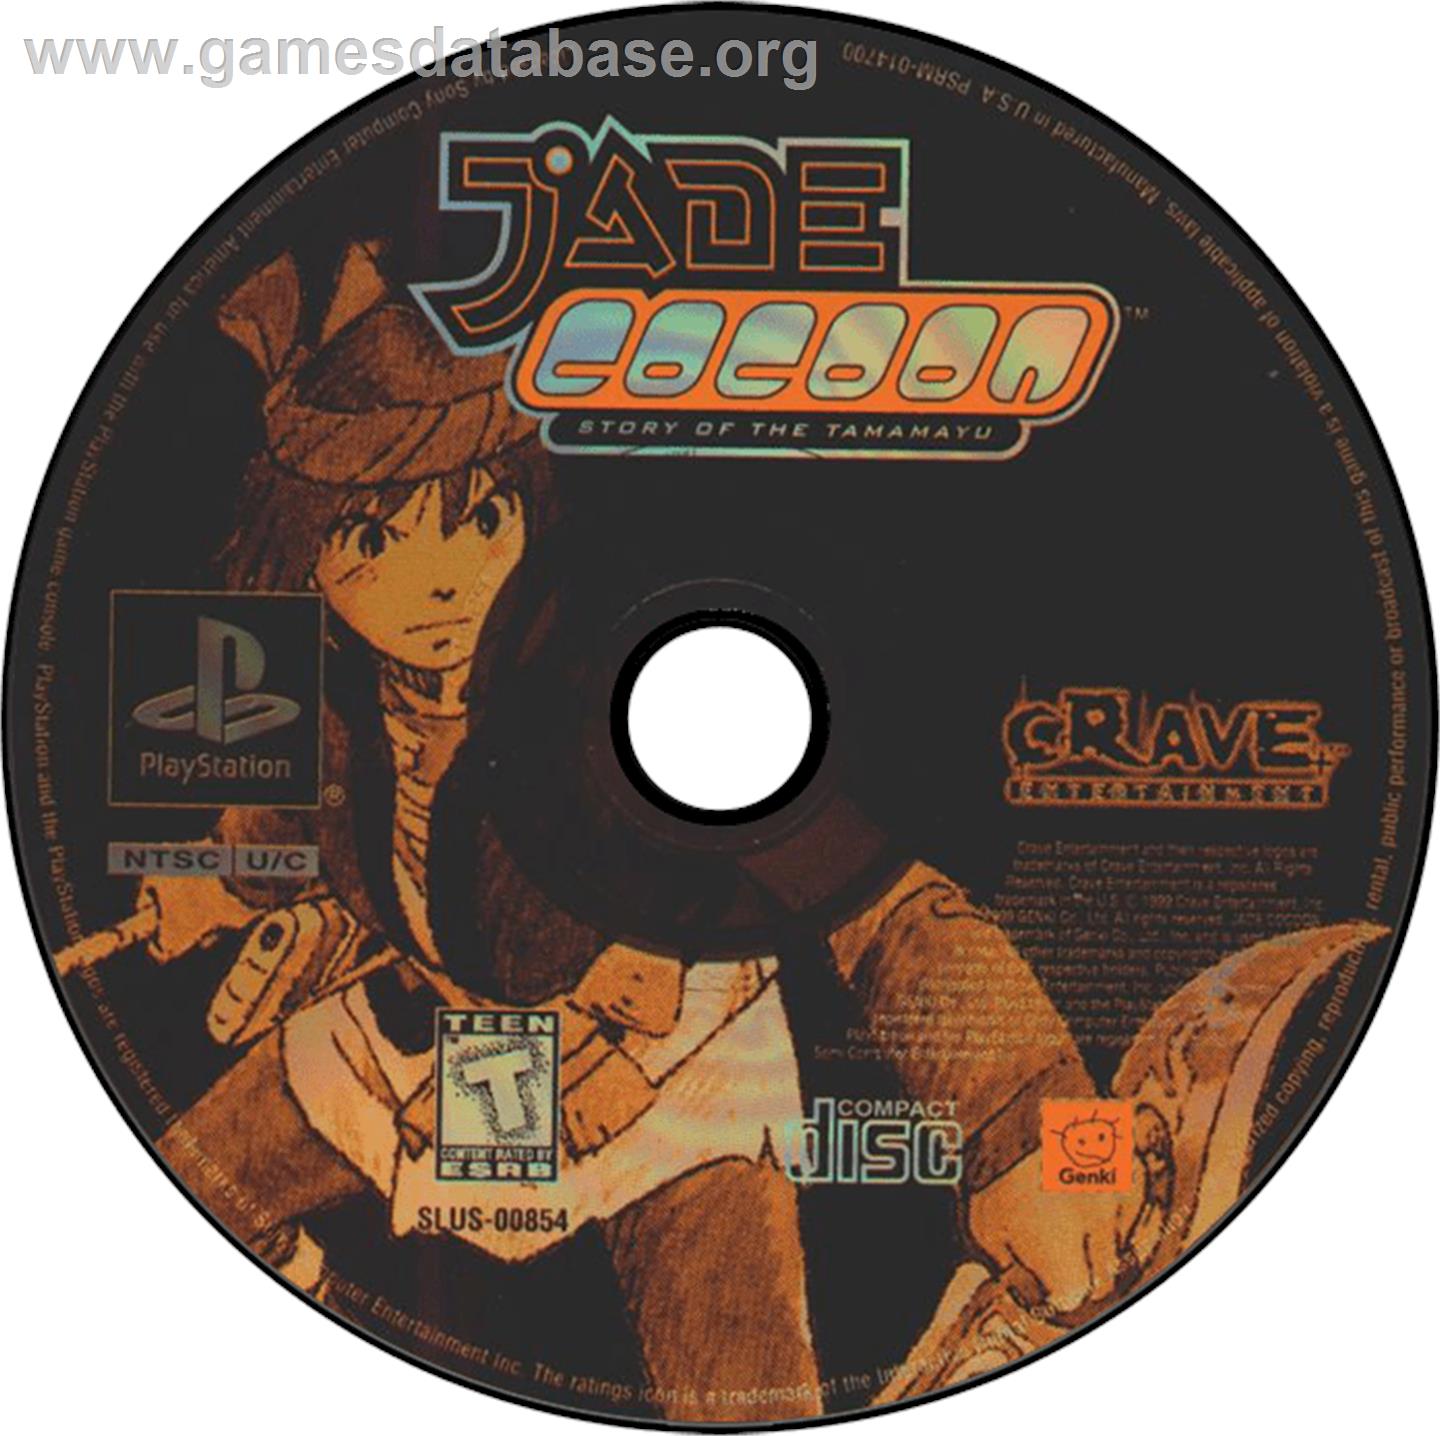 Jade Cocoon: Story of the Tamamayu - Sony Playstation - Artwork - Disc